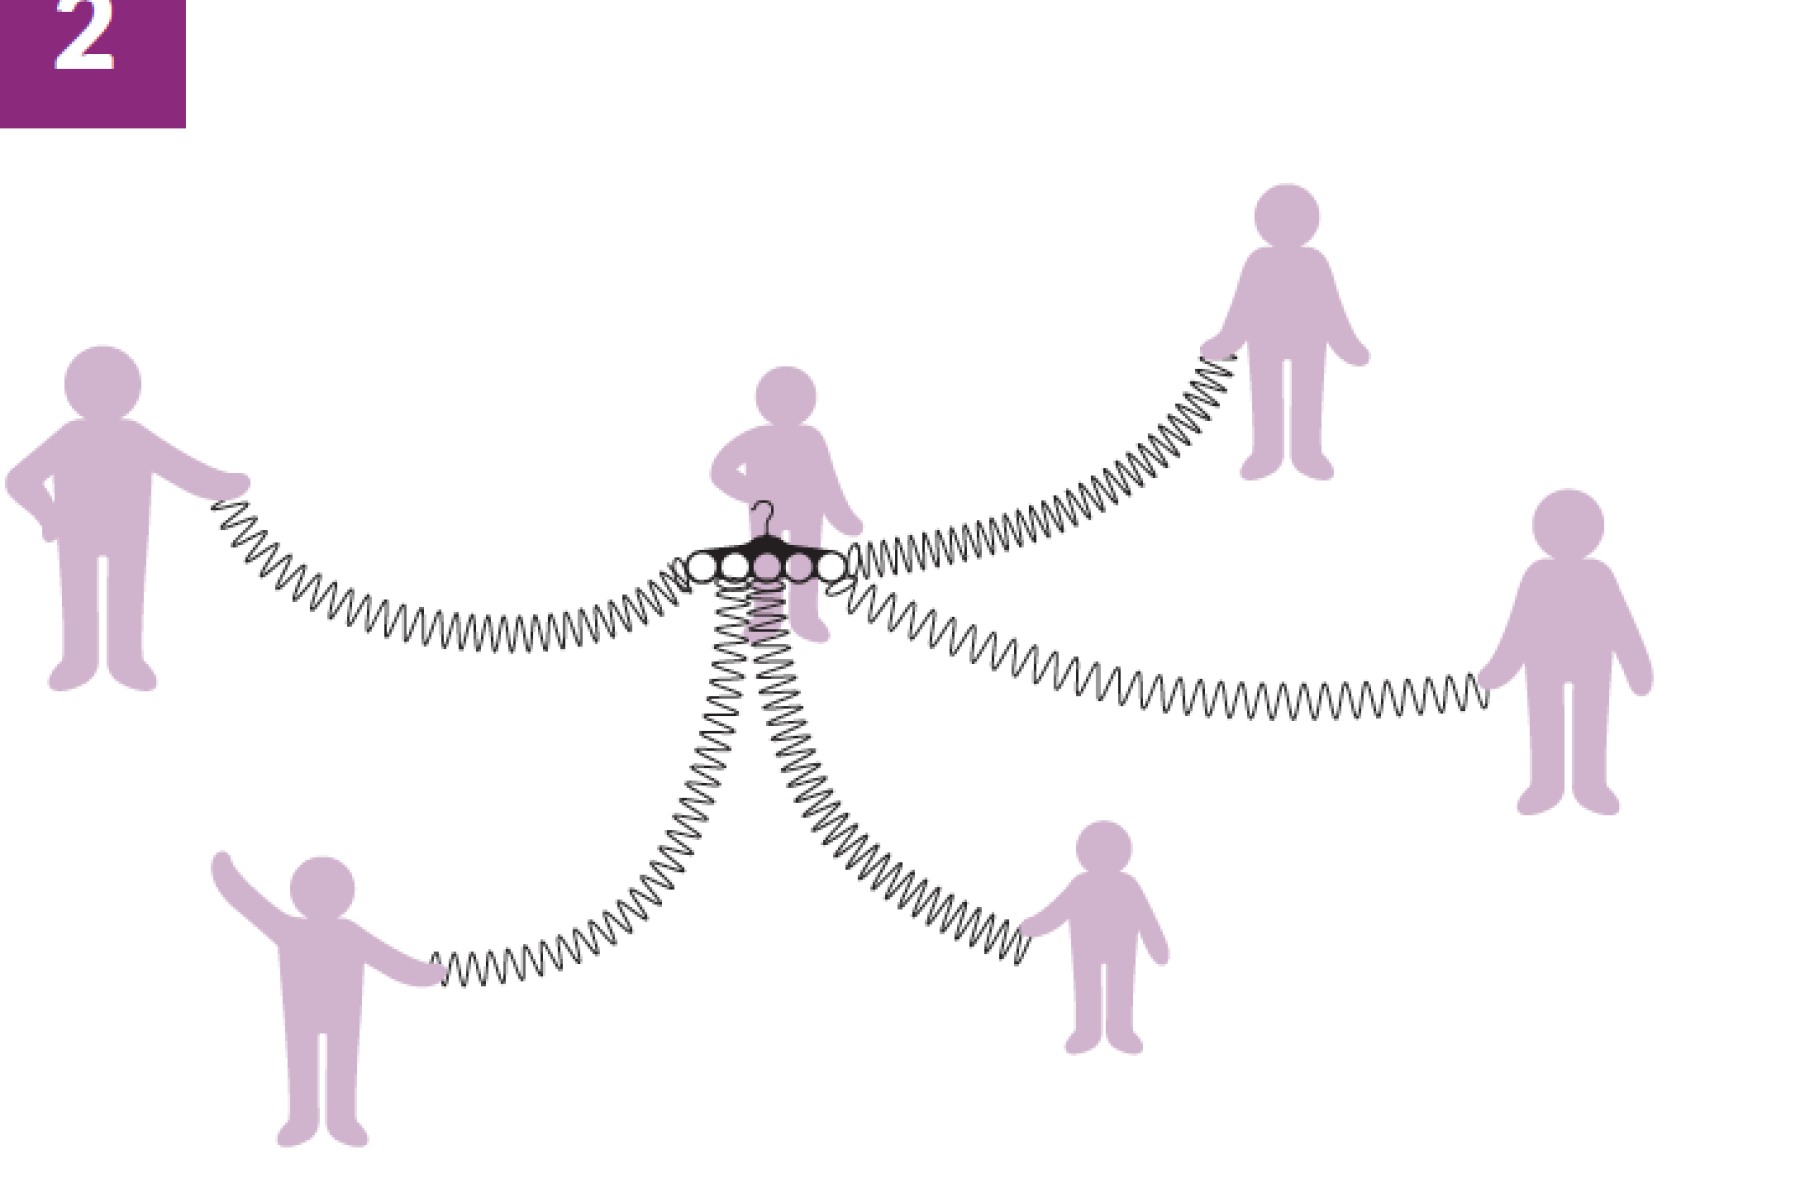 Illustration showing a group of participants holding one old of a slinky wile a facilitator makes a "quake"